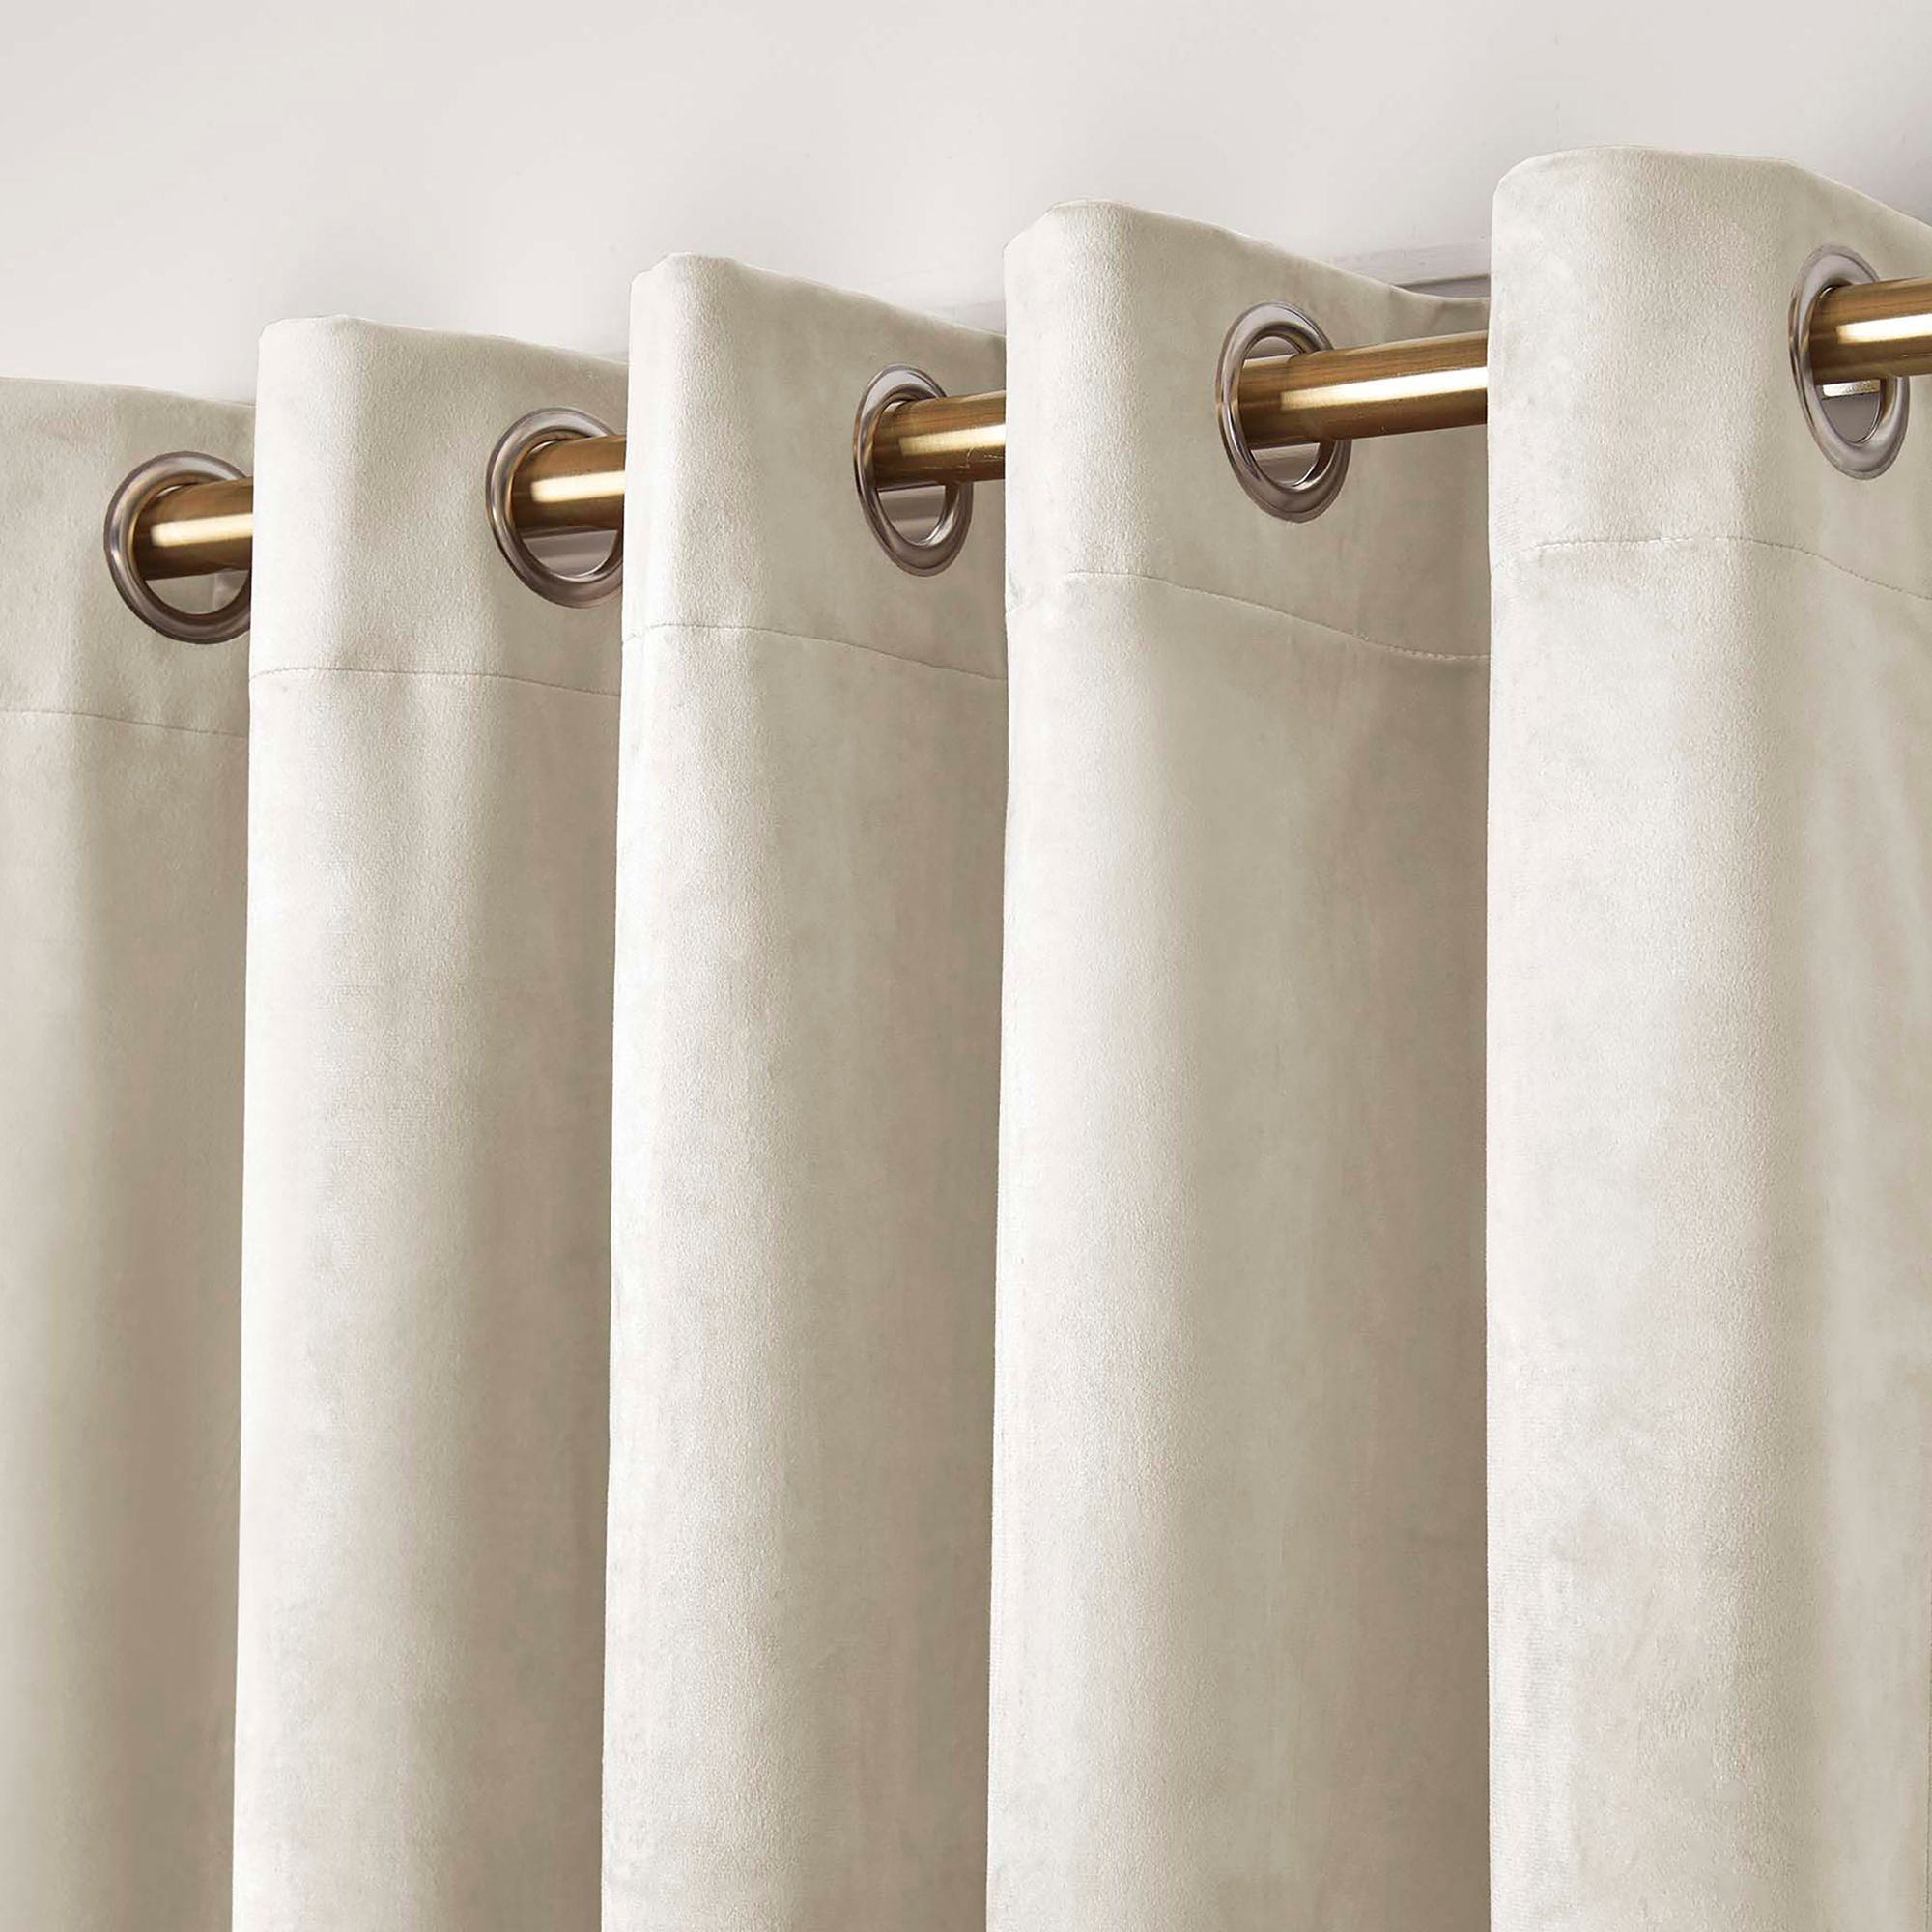 Montrose Pair of Eyelet Curtains by Laurence Llewelyn-Bowen in Ivory - Pair of Eyelet Curtains - Laurence Llewelyn-Bowen